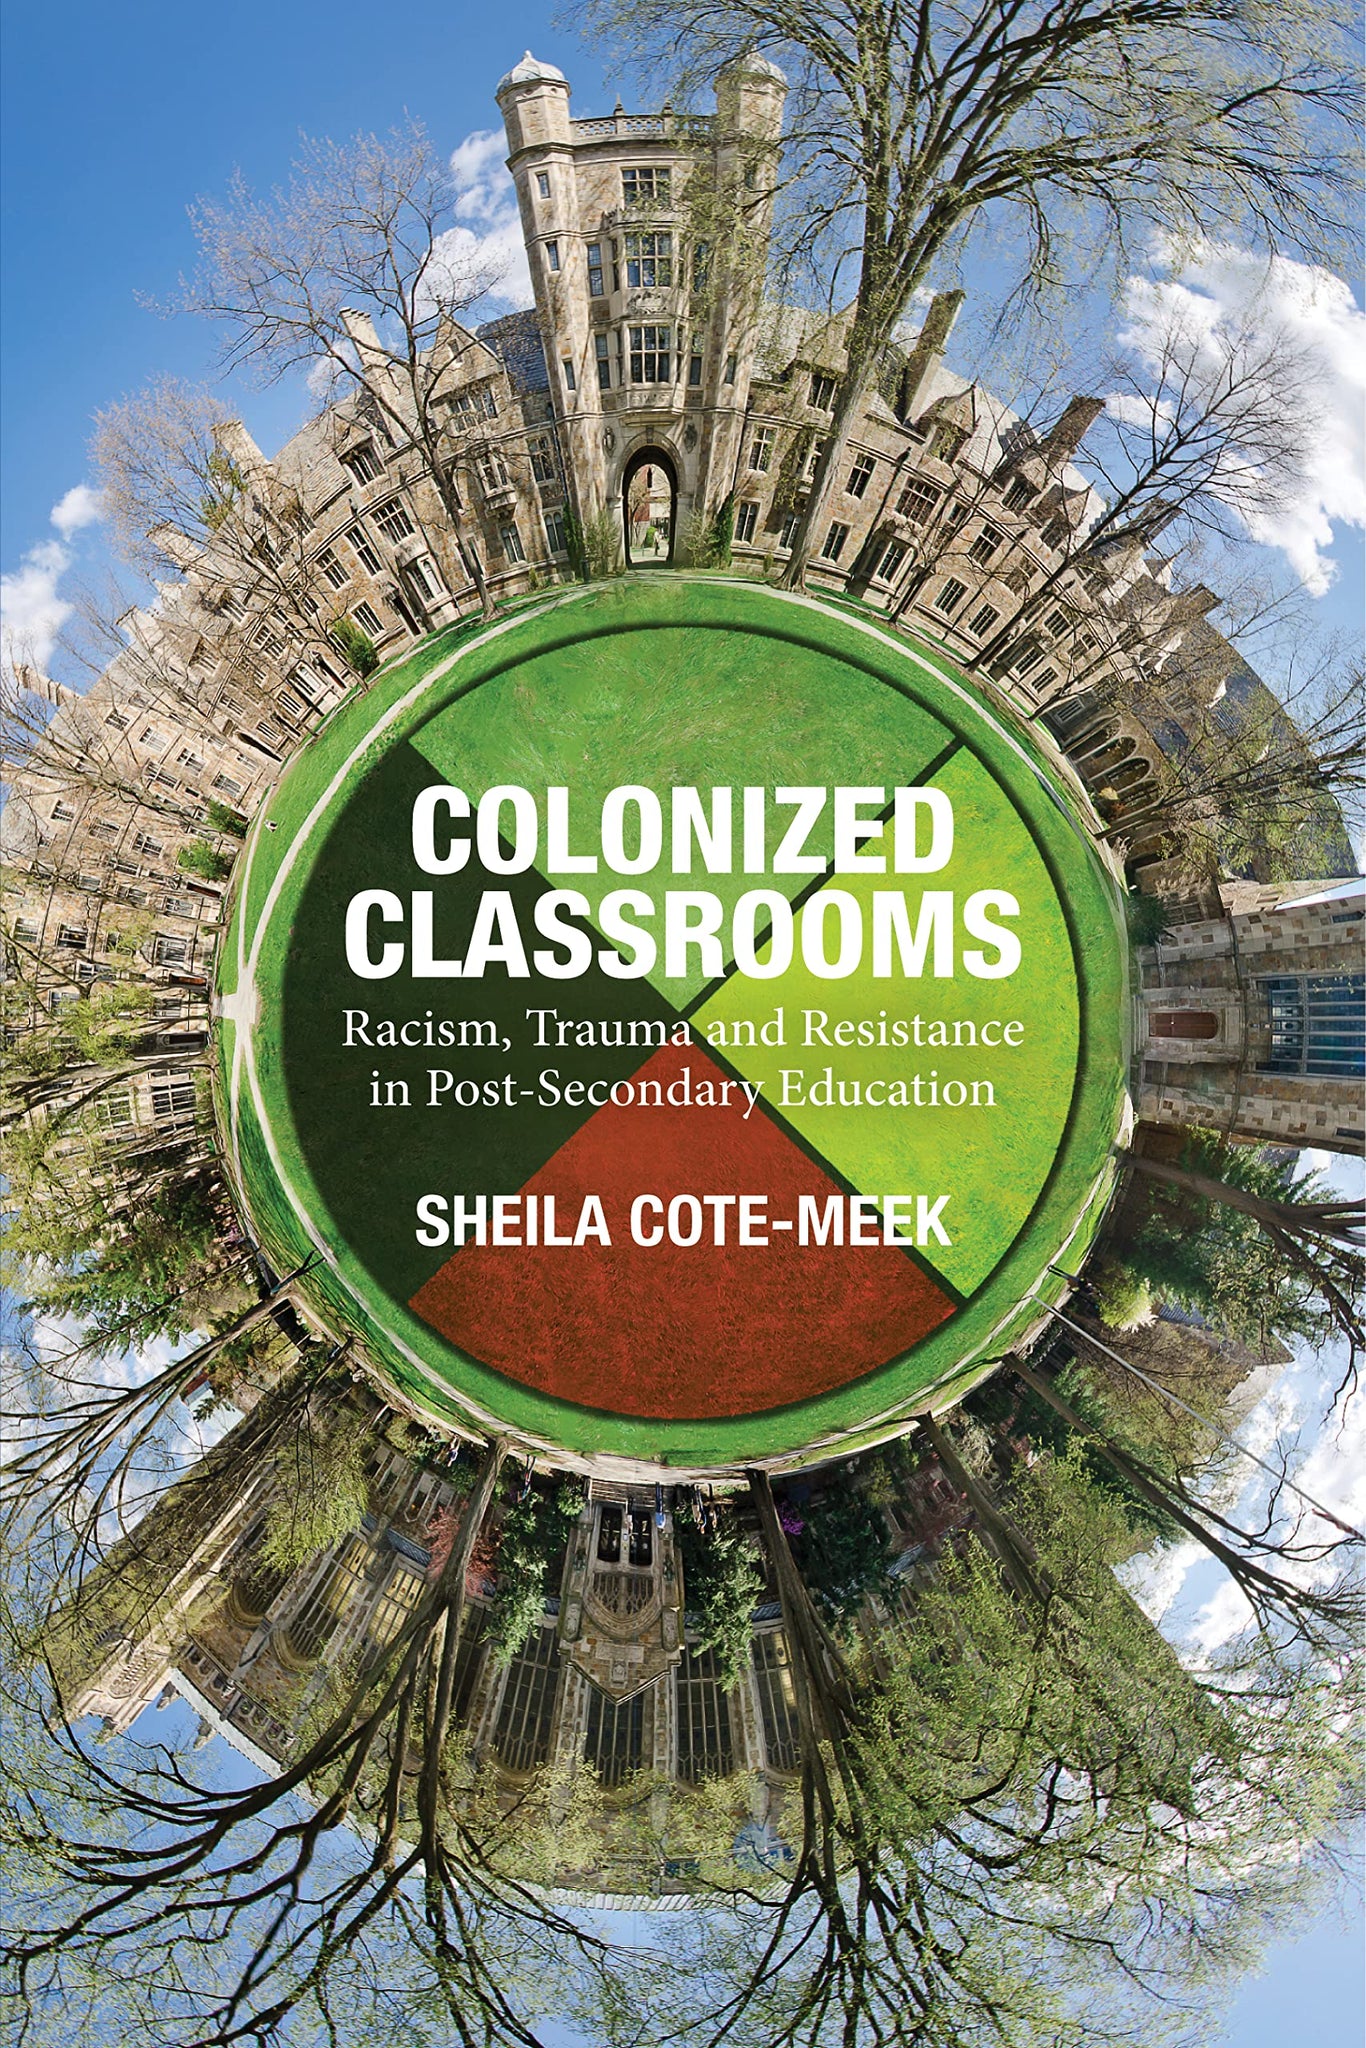 Colonized Classrooms: Racism, Trauma and Resistance in Post-Secondary Education